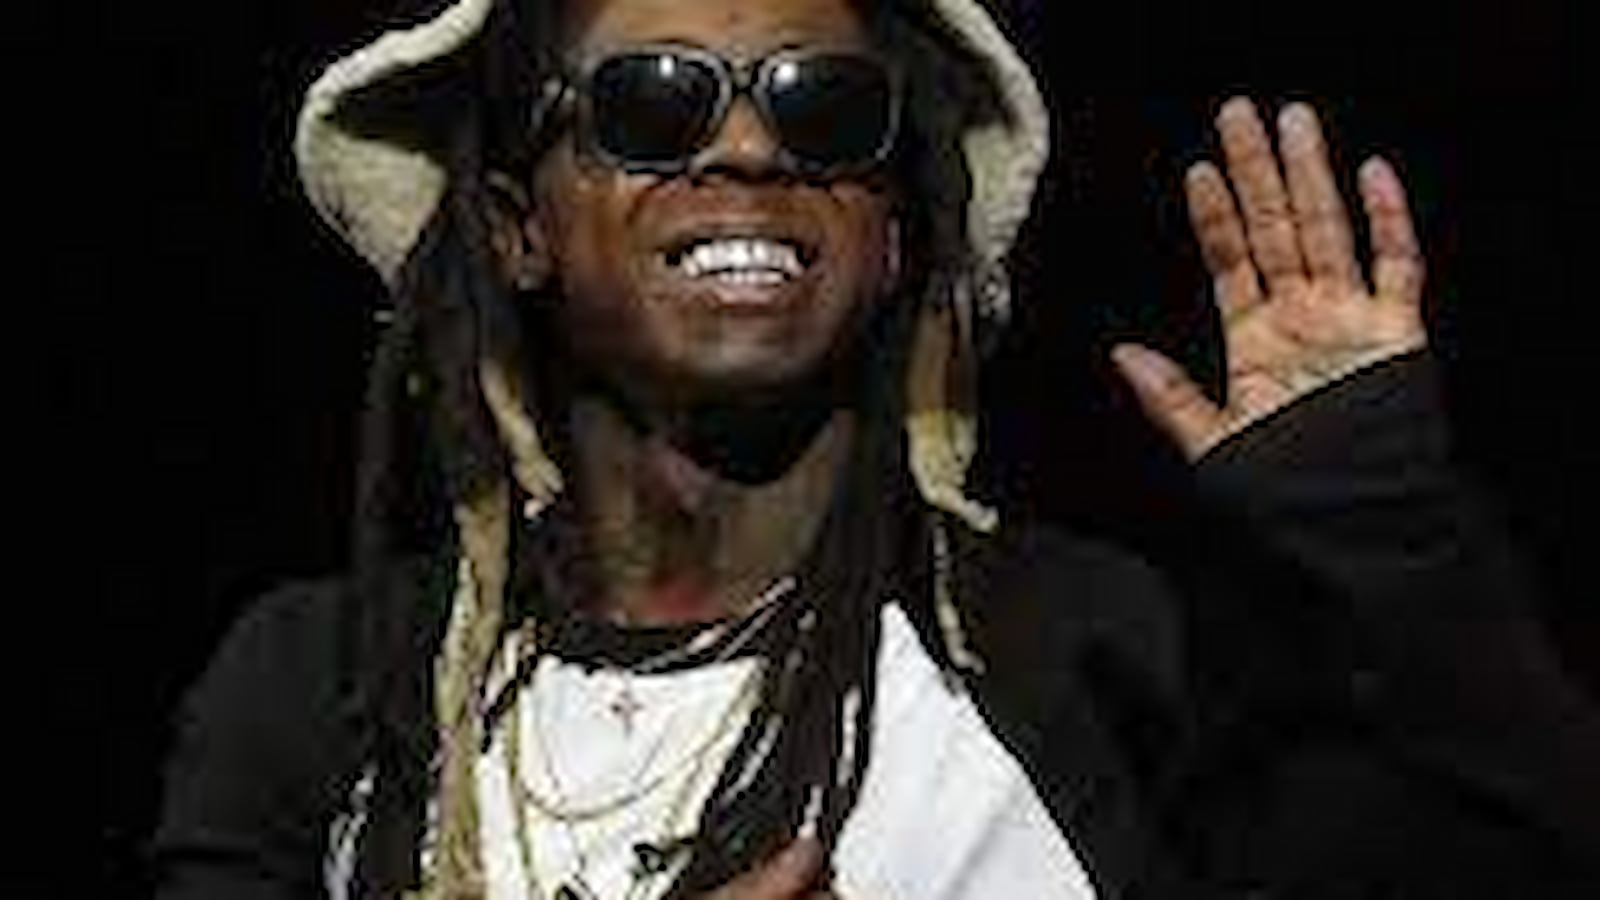 Lil Wayne Biography: Age, Height, Career, Family, Personal Life, Net Worth